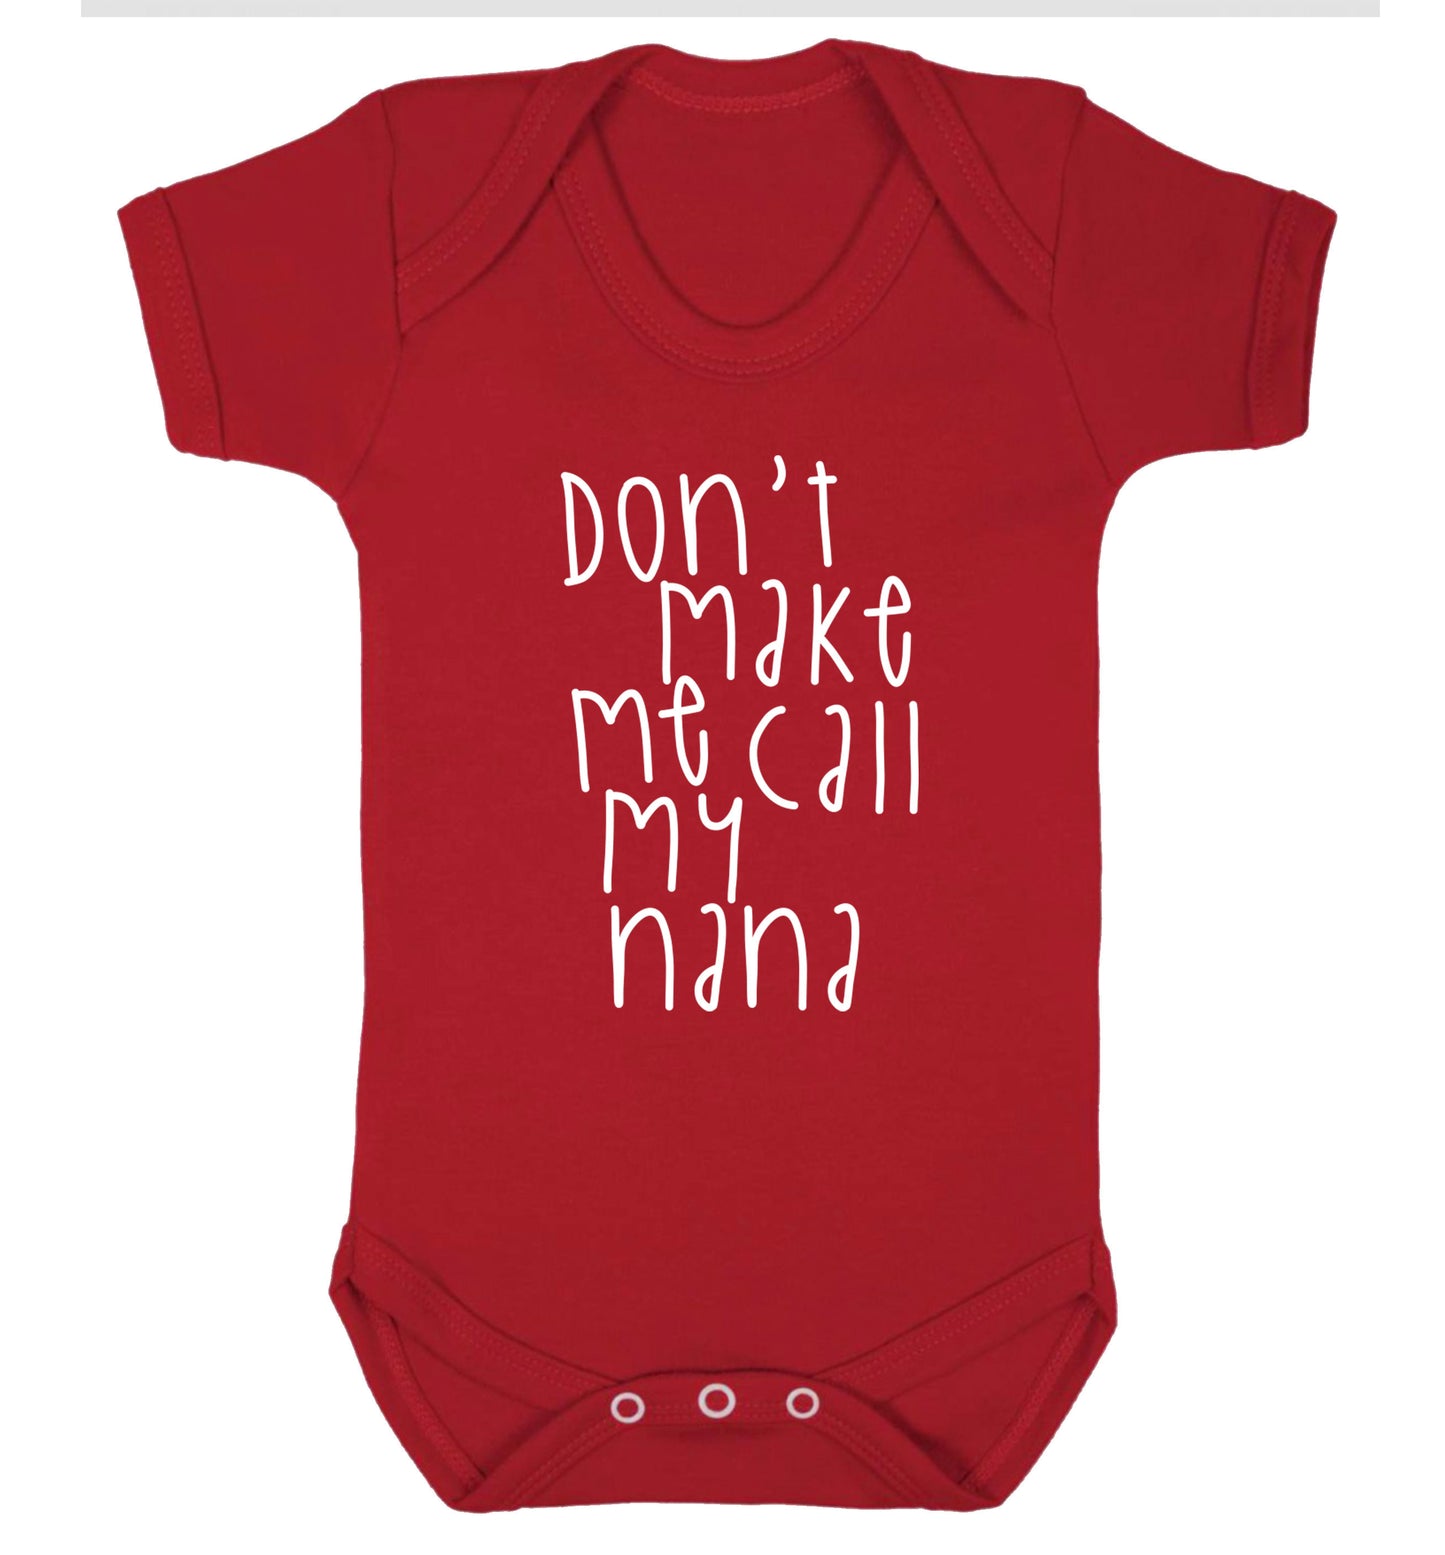 Don't make me call my nana Baby Vest red 18-24 months